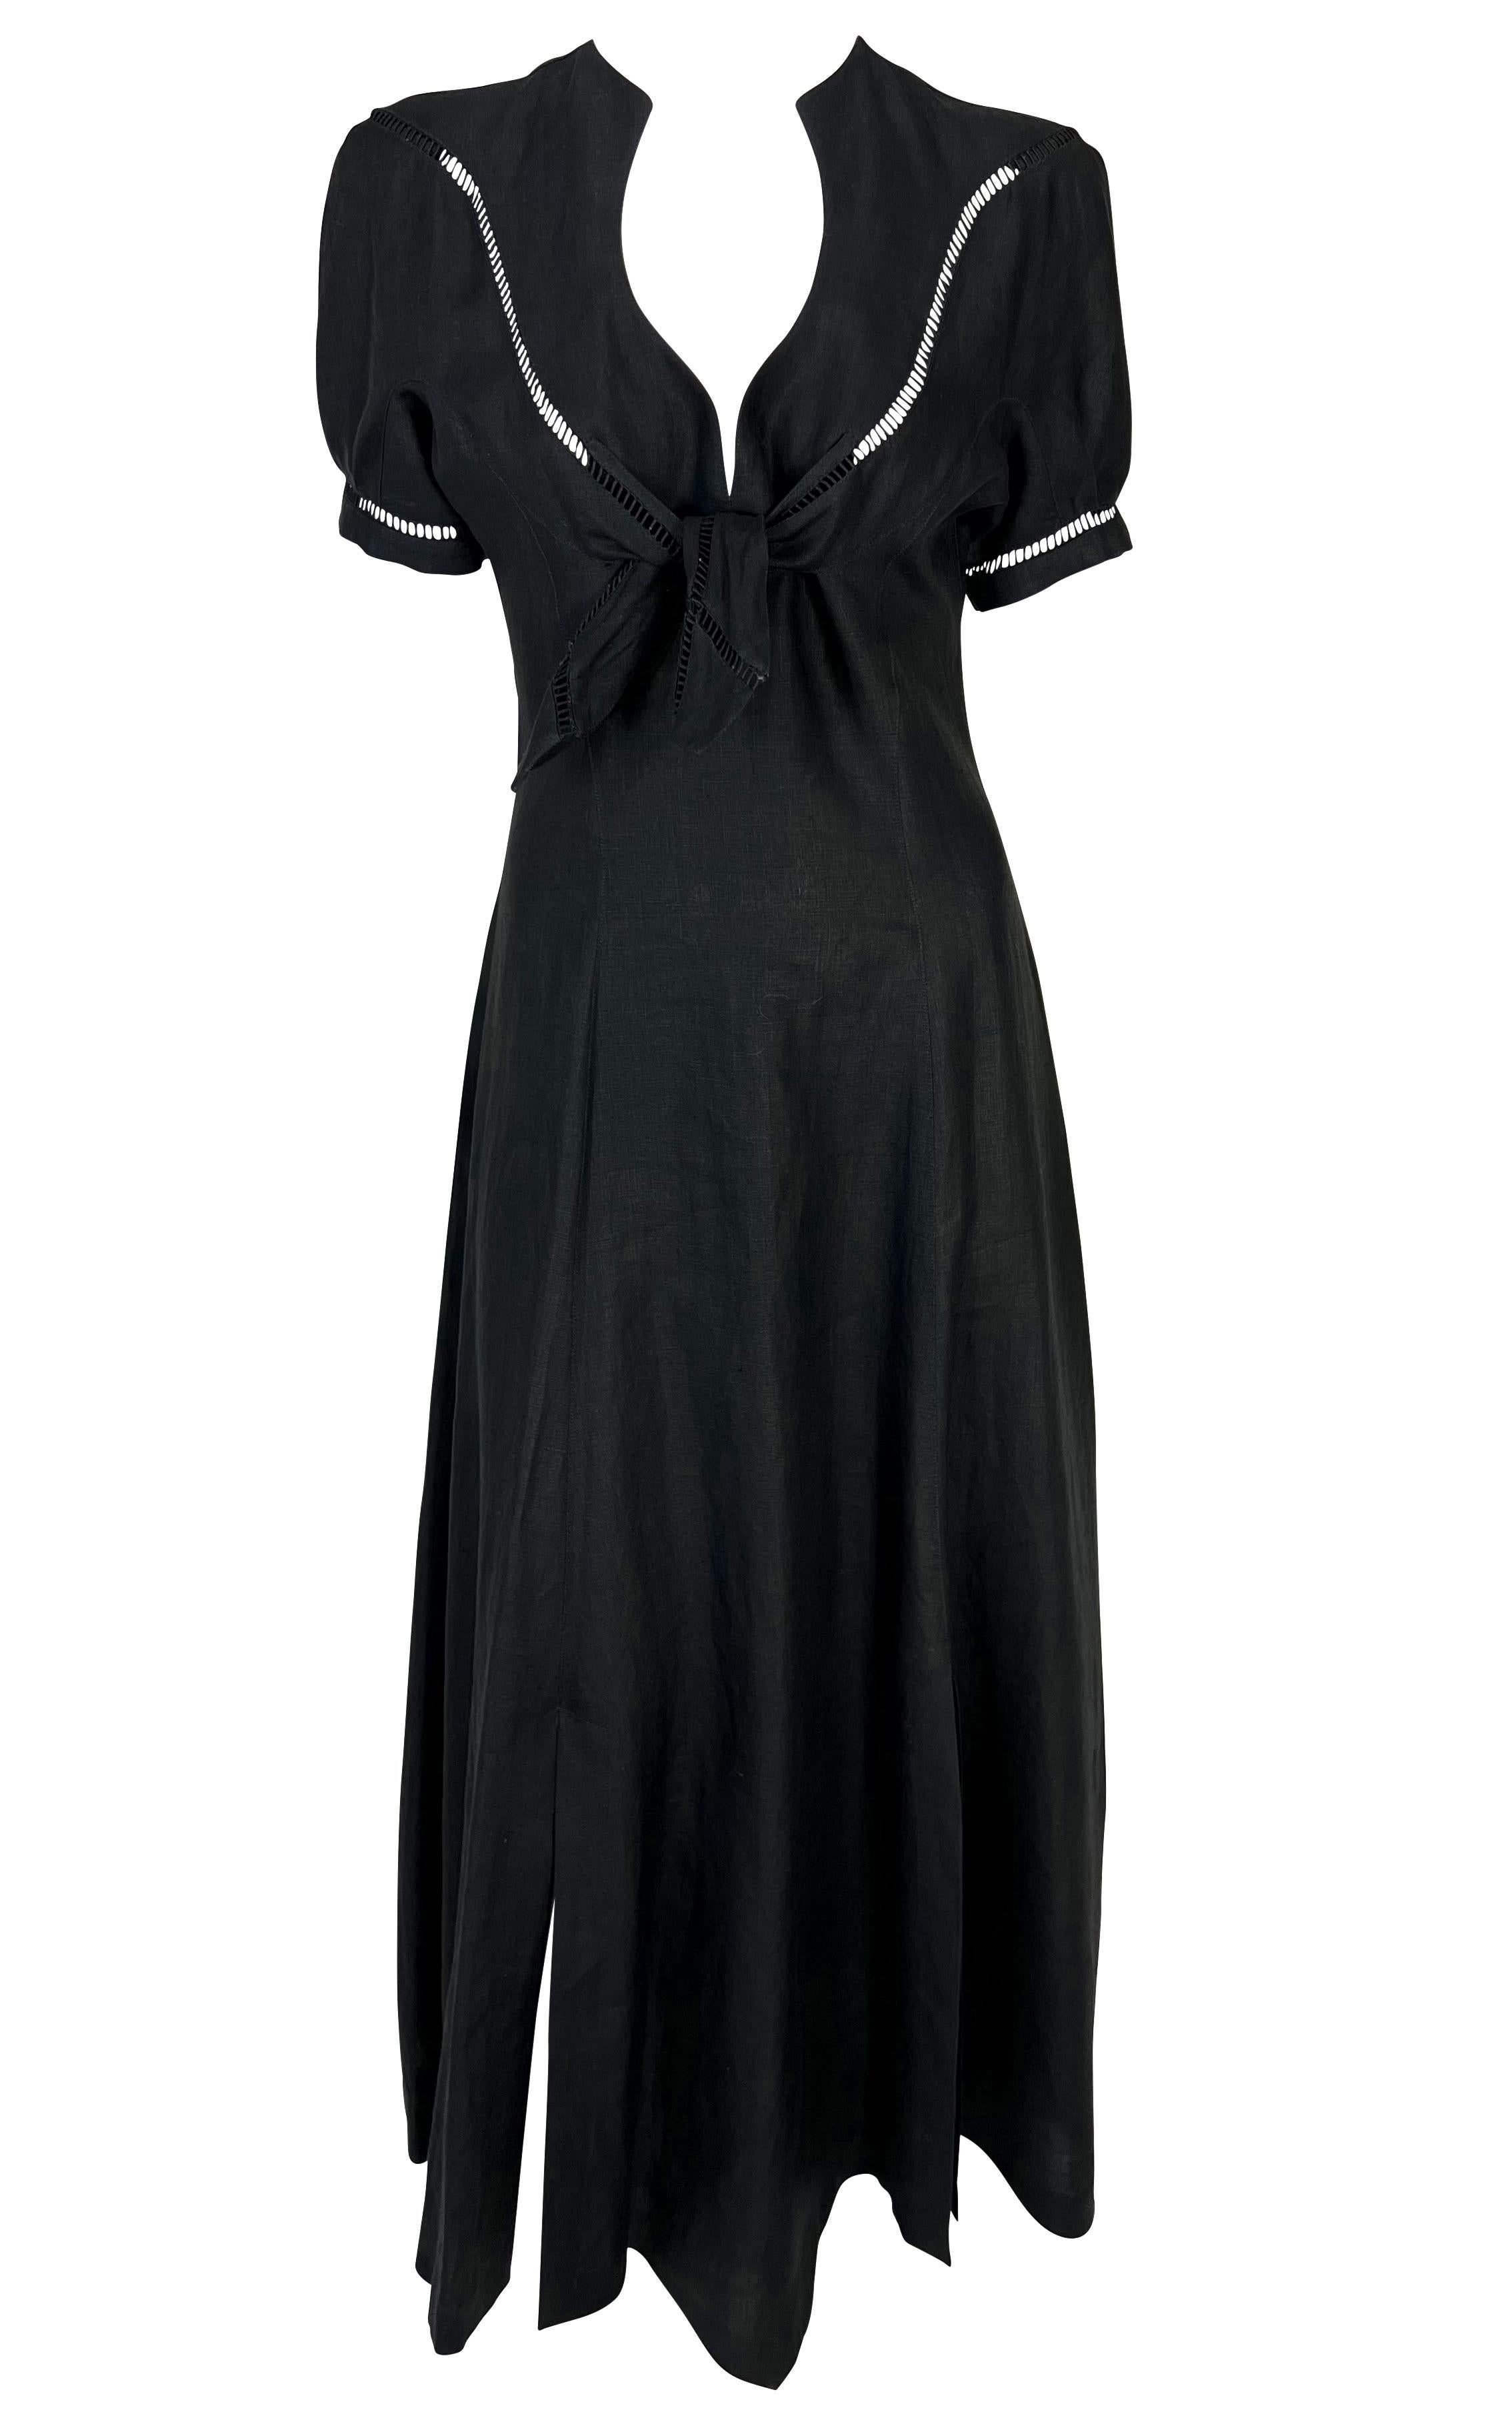 S/S 1992 Thierry Mugler Sheer Black Linen Tie Slit Maxi Flare Western Dress For Sale